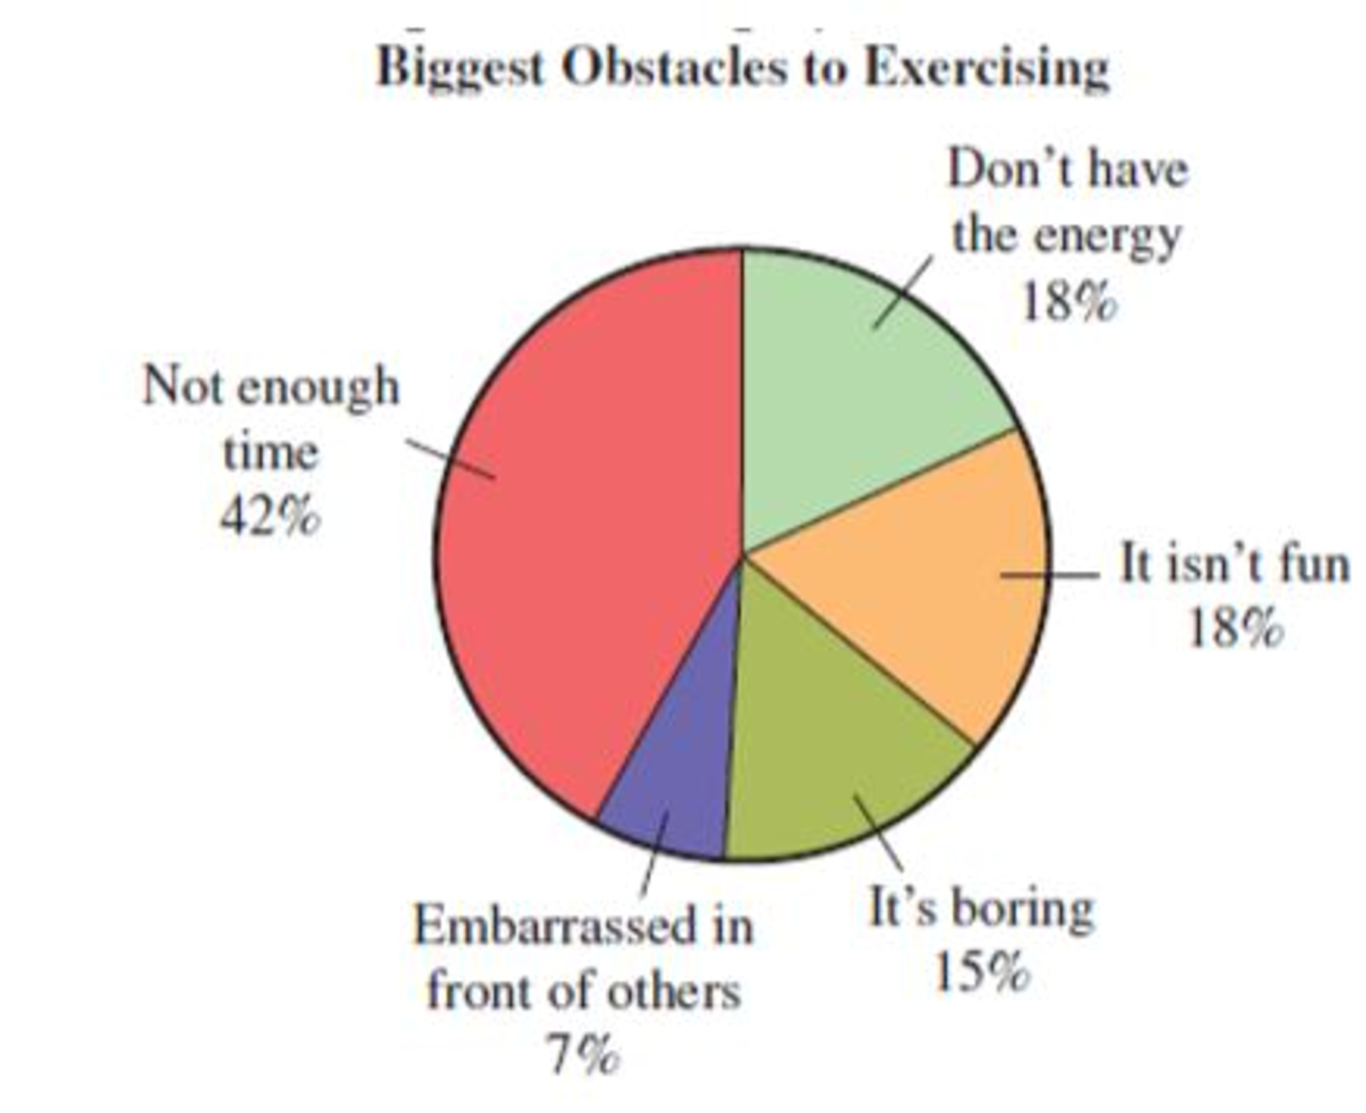 Chapter 1.2, Problem 32E, Exercising The circle graph below shows the biggest obstacles to sticking to an exercise program, as 